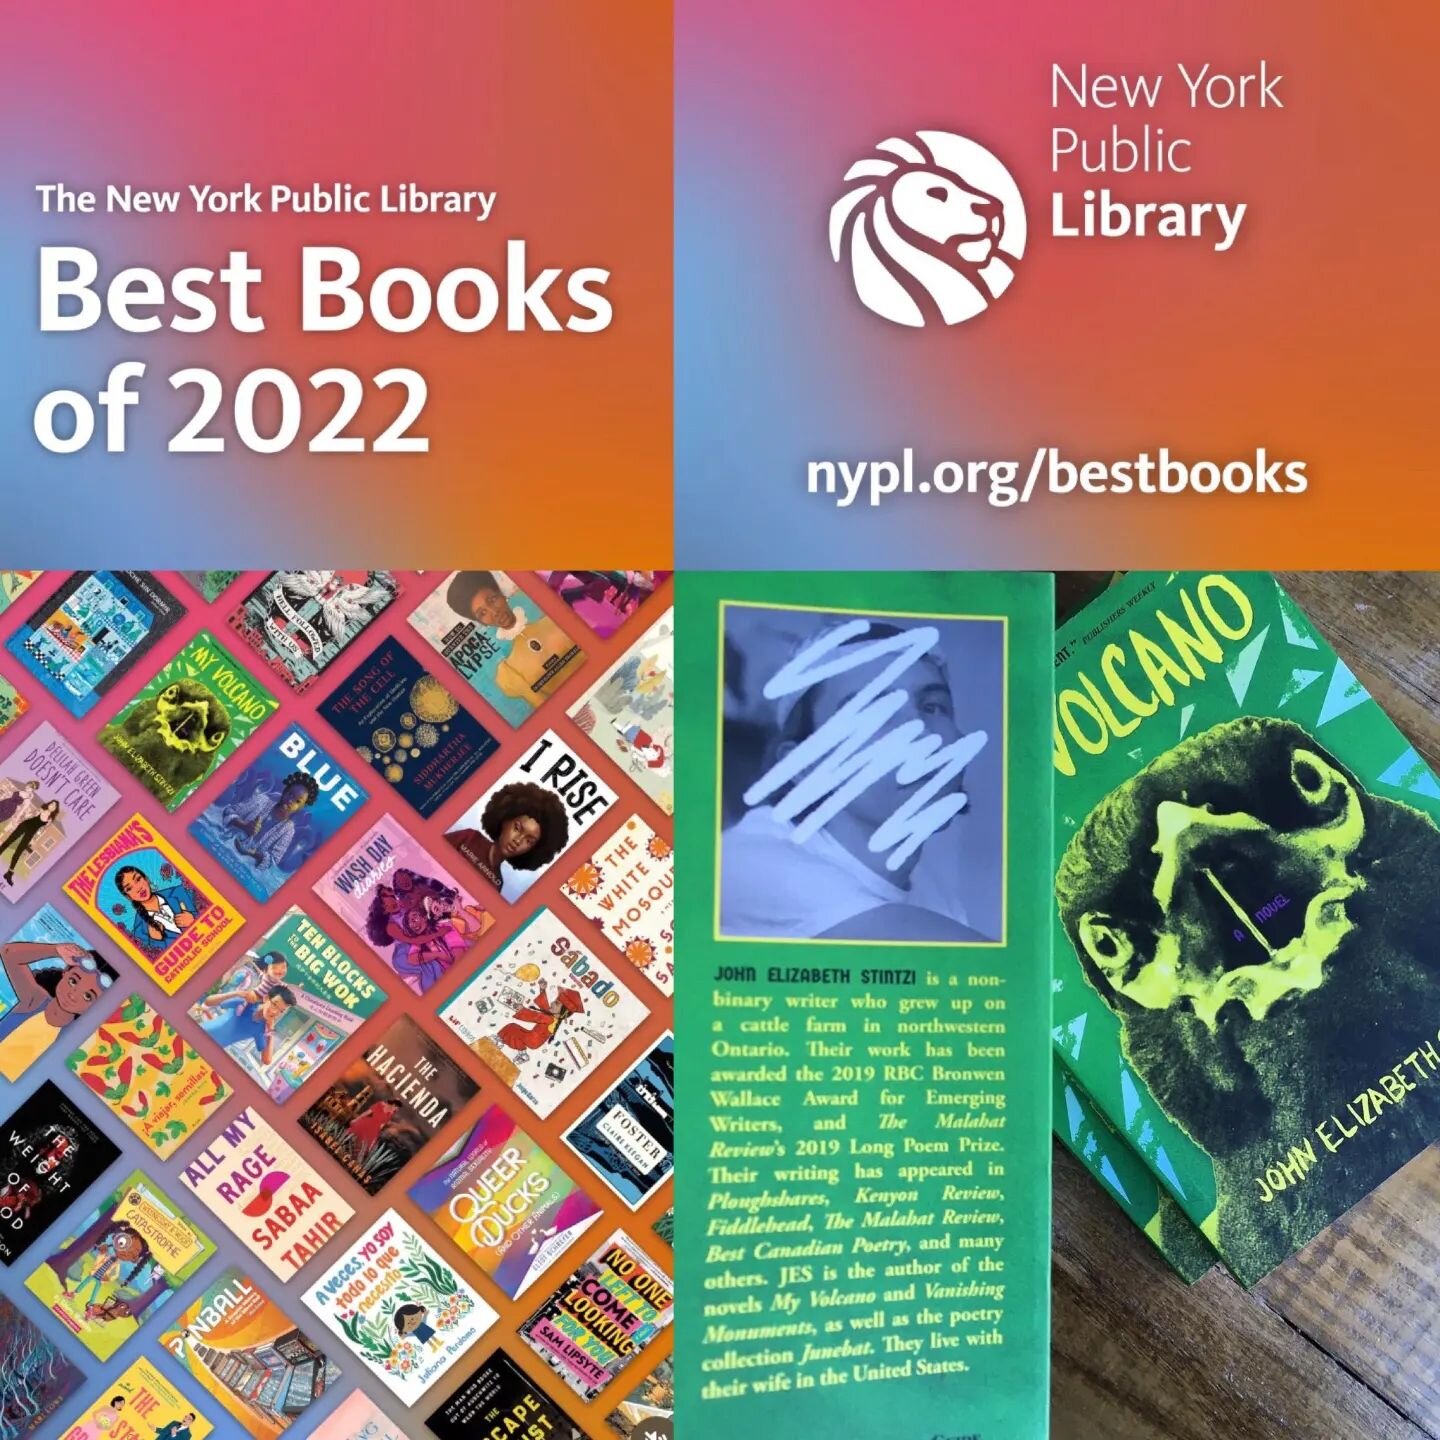 In case any of y'all missed my story, I'm tickled that MY VOLCANO was named a best book of 2022 by @nypl! 

A character in the book (Jahan) actually accesses some resources from the library in the book, amusingly, and I always liked to go hang out at